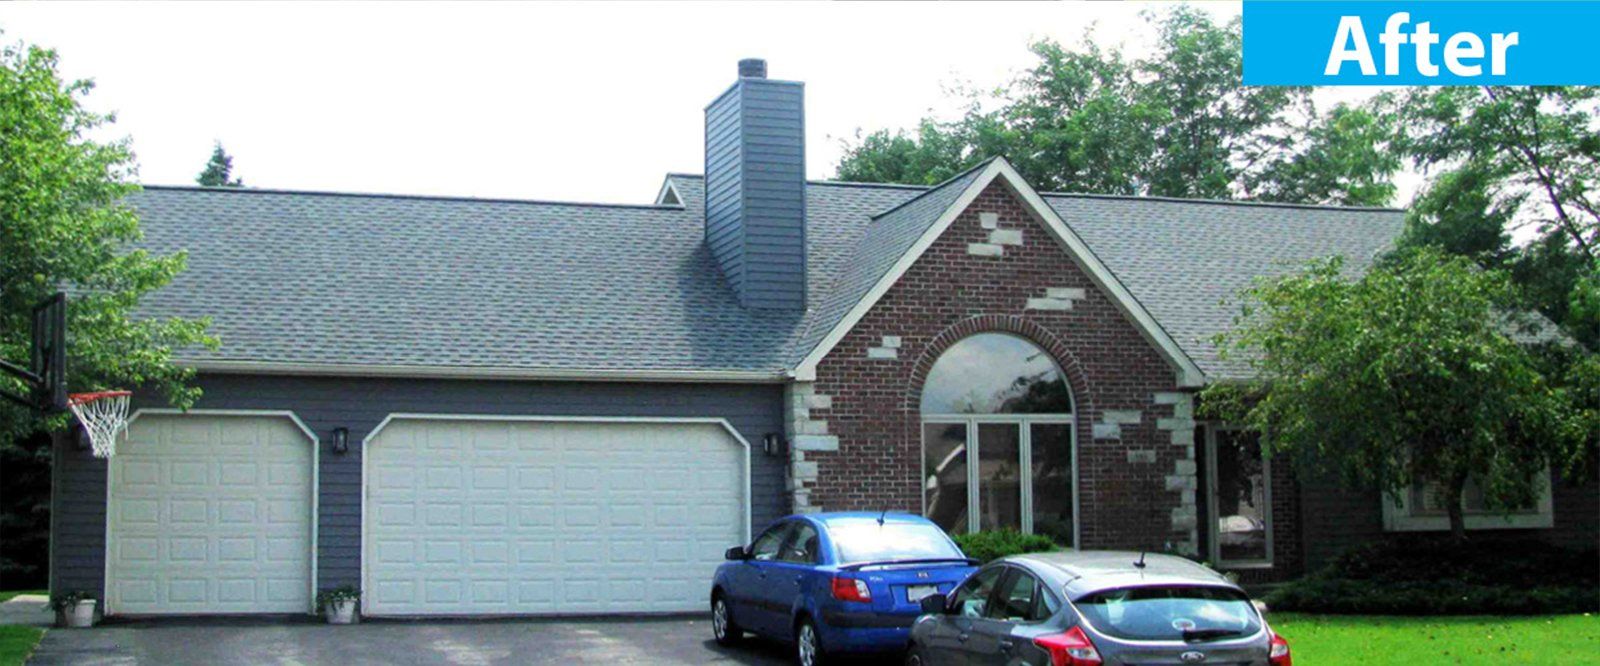 After House with Garage Roofing — Burlington, WI — Mather’s Improvement Service LTD